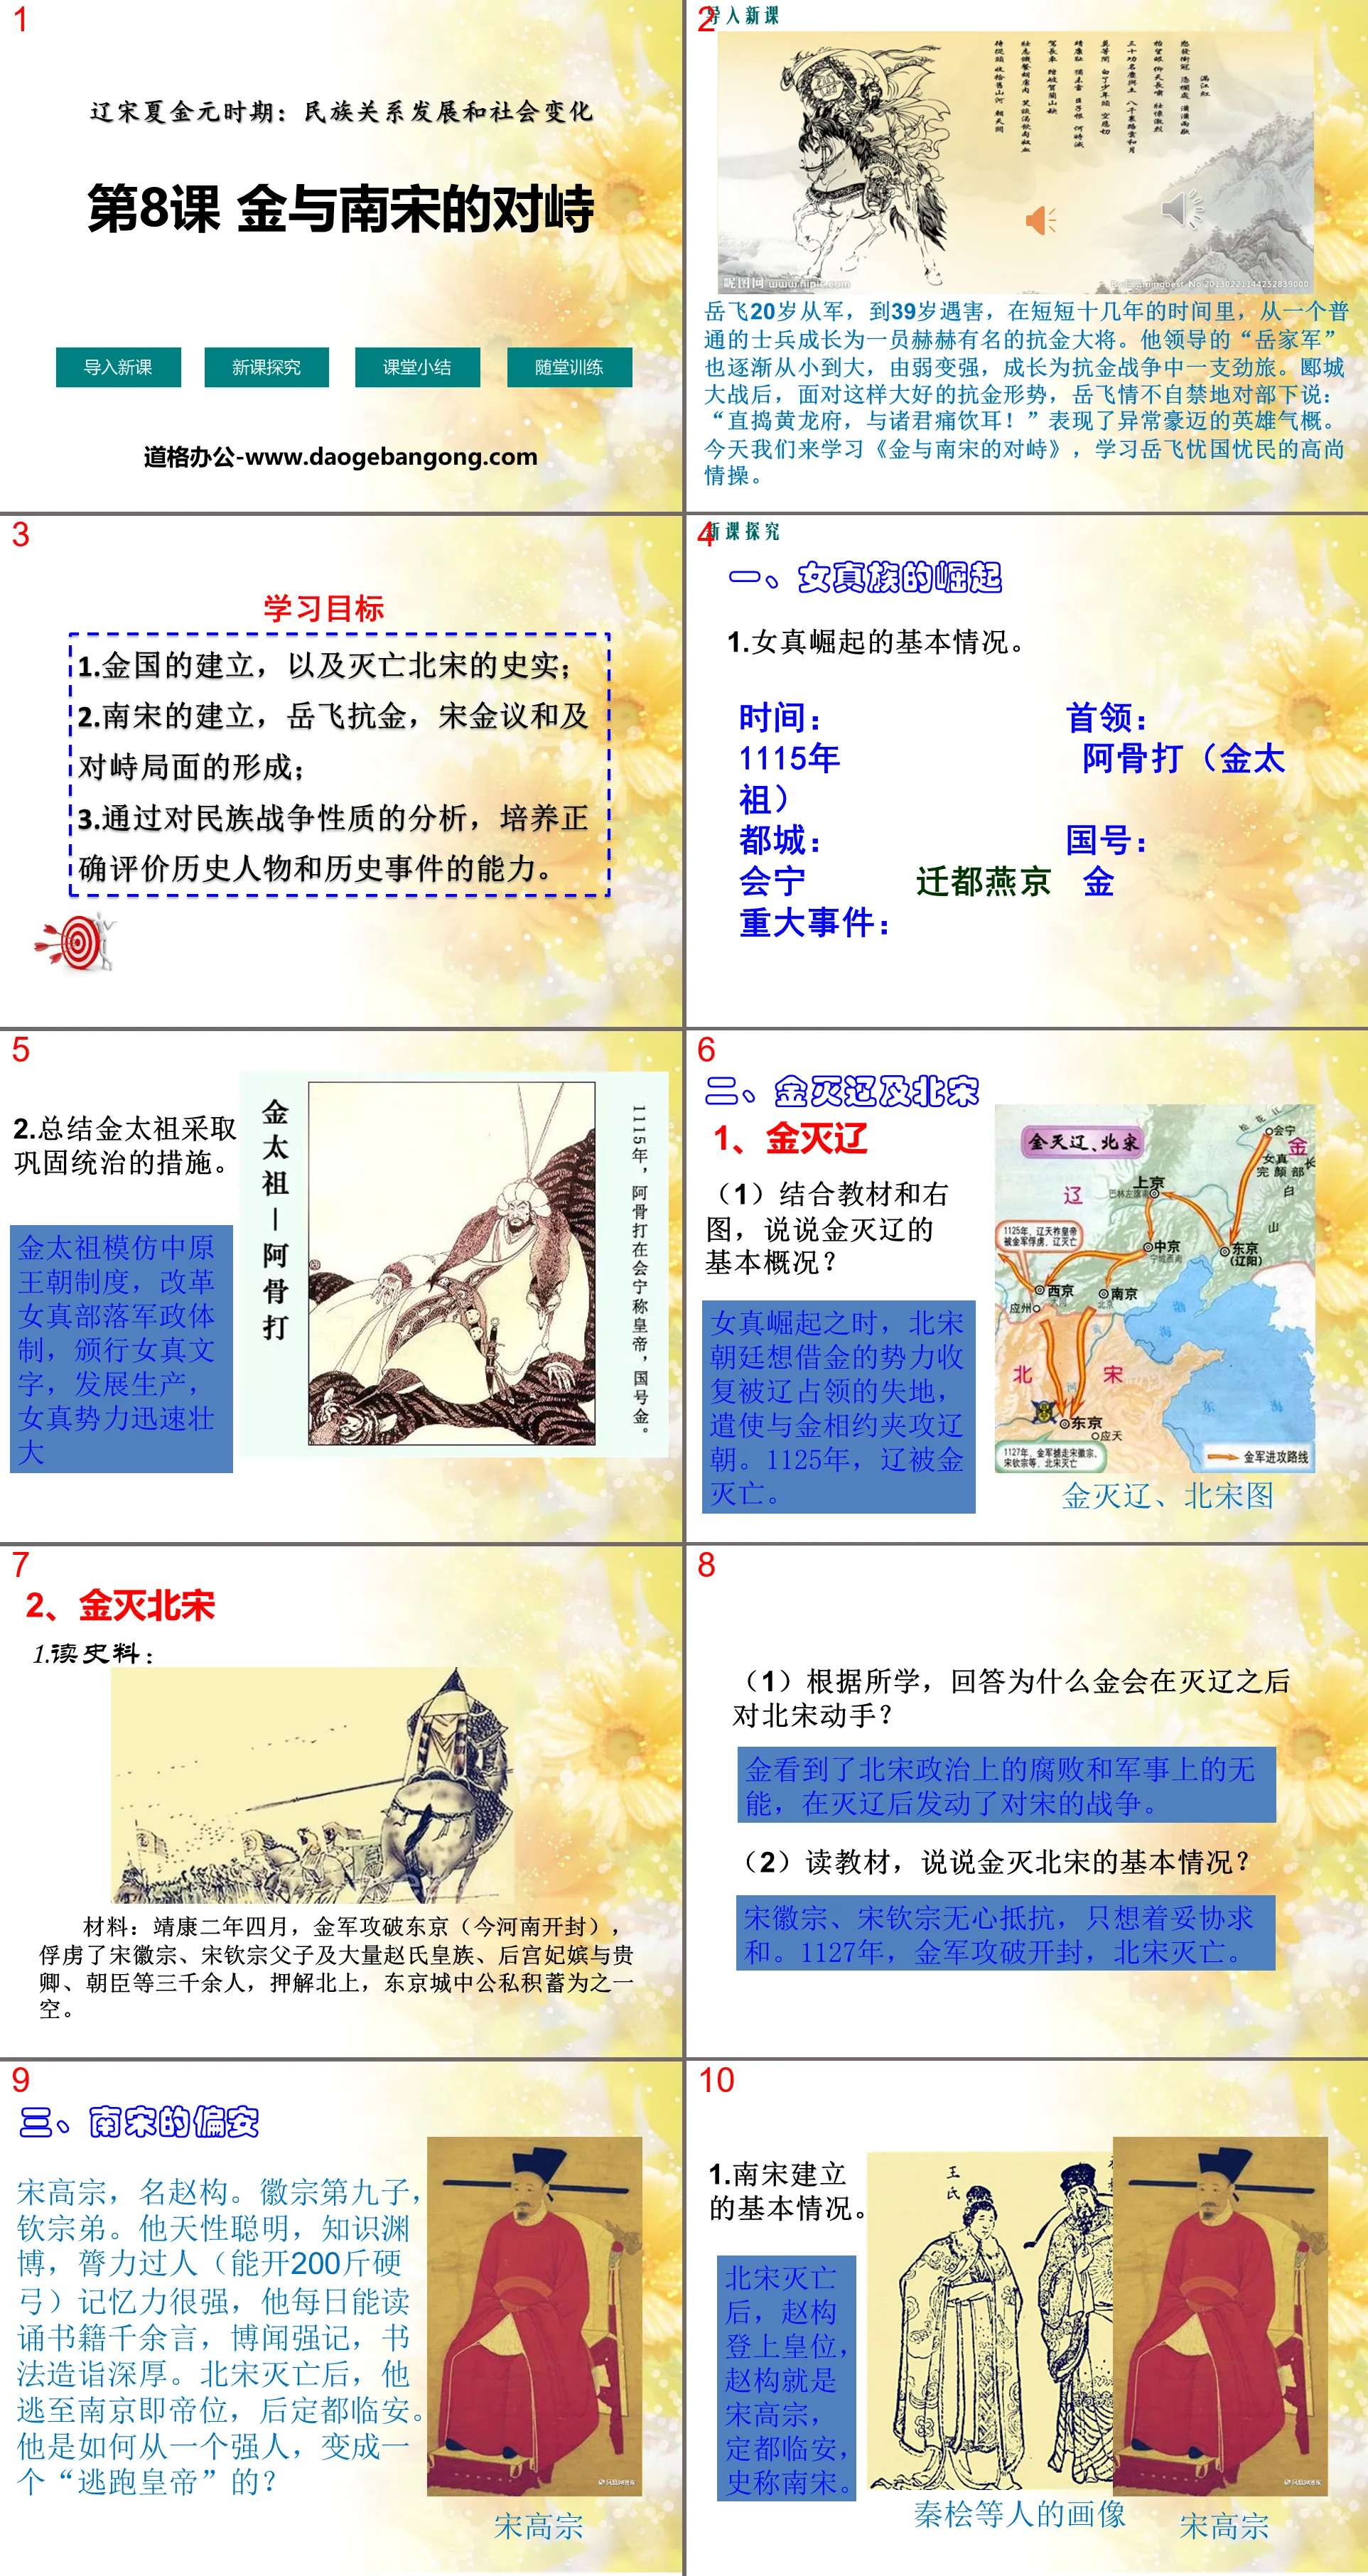 "The Confrontation between the Jin Dynasty and the Southern Song Dynasty" PPT courseware